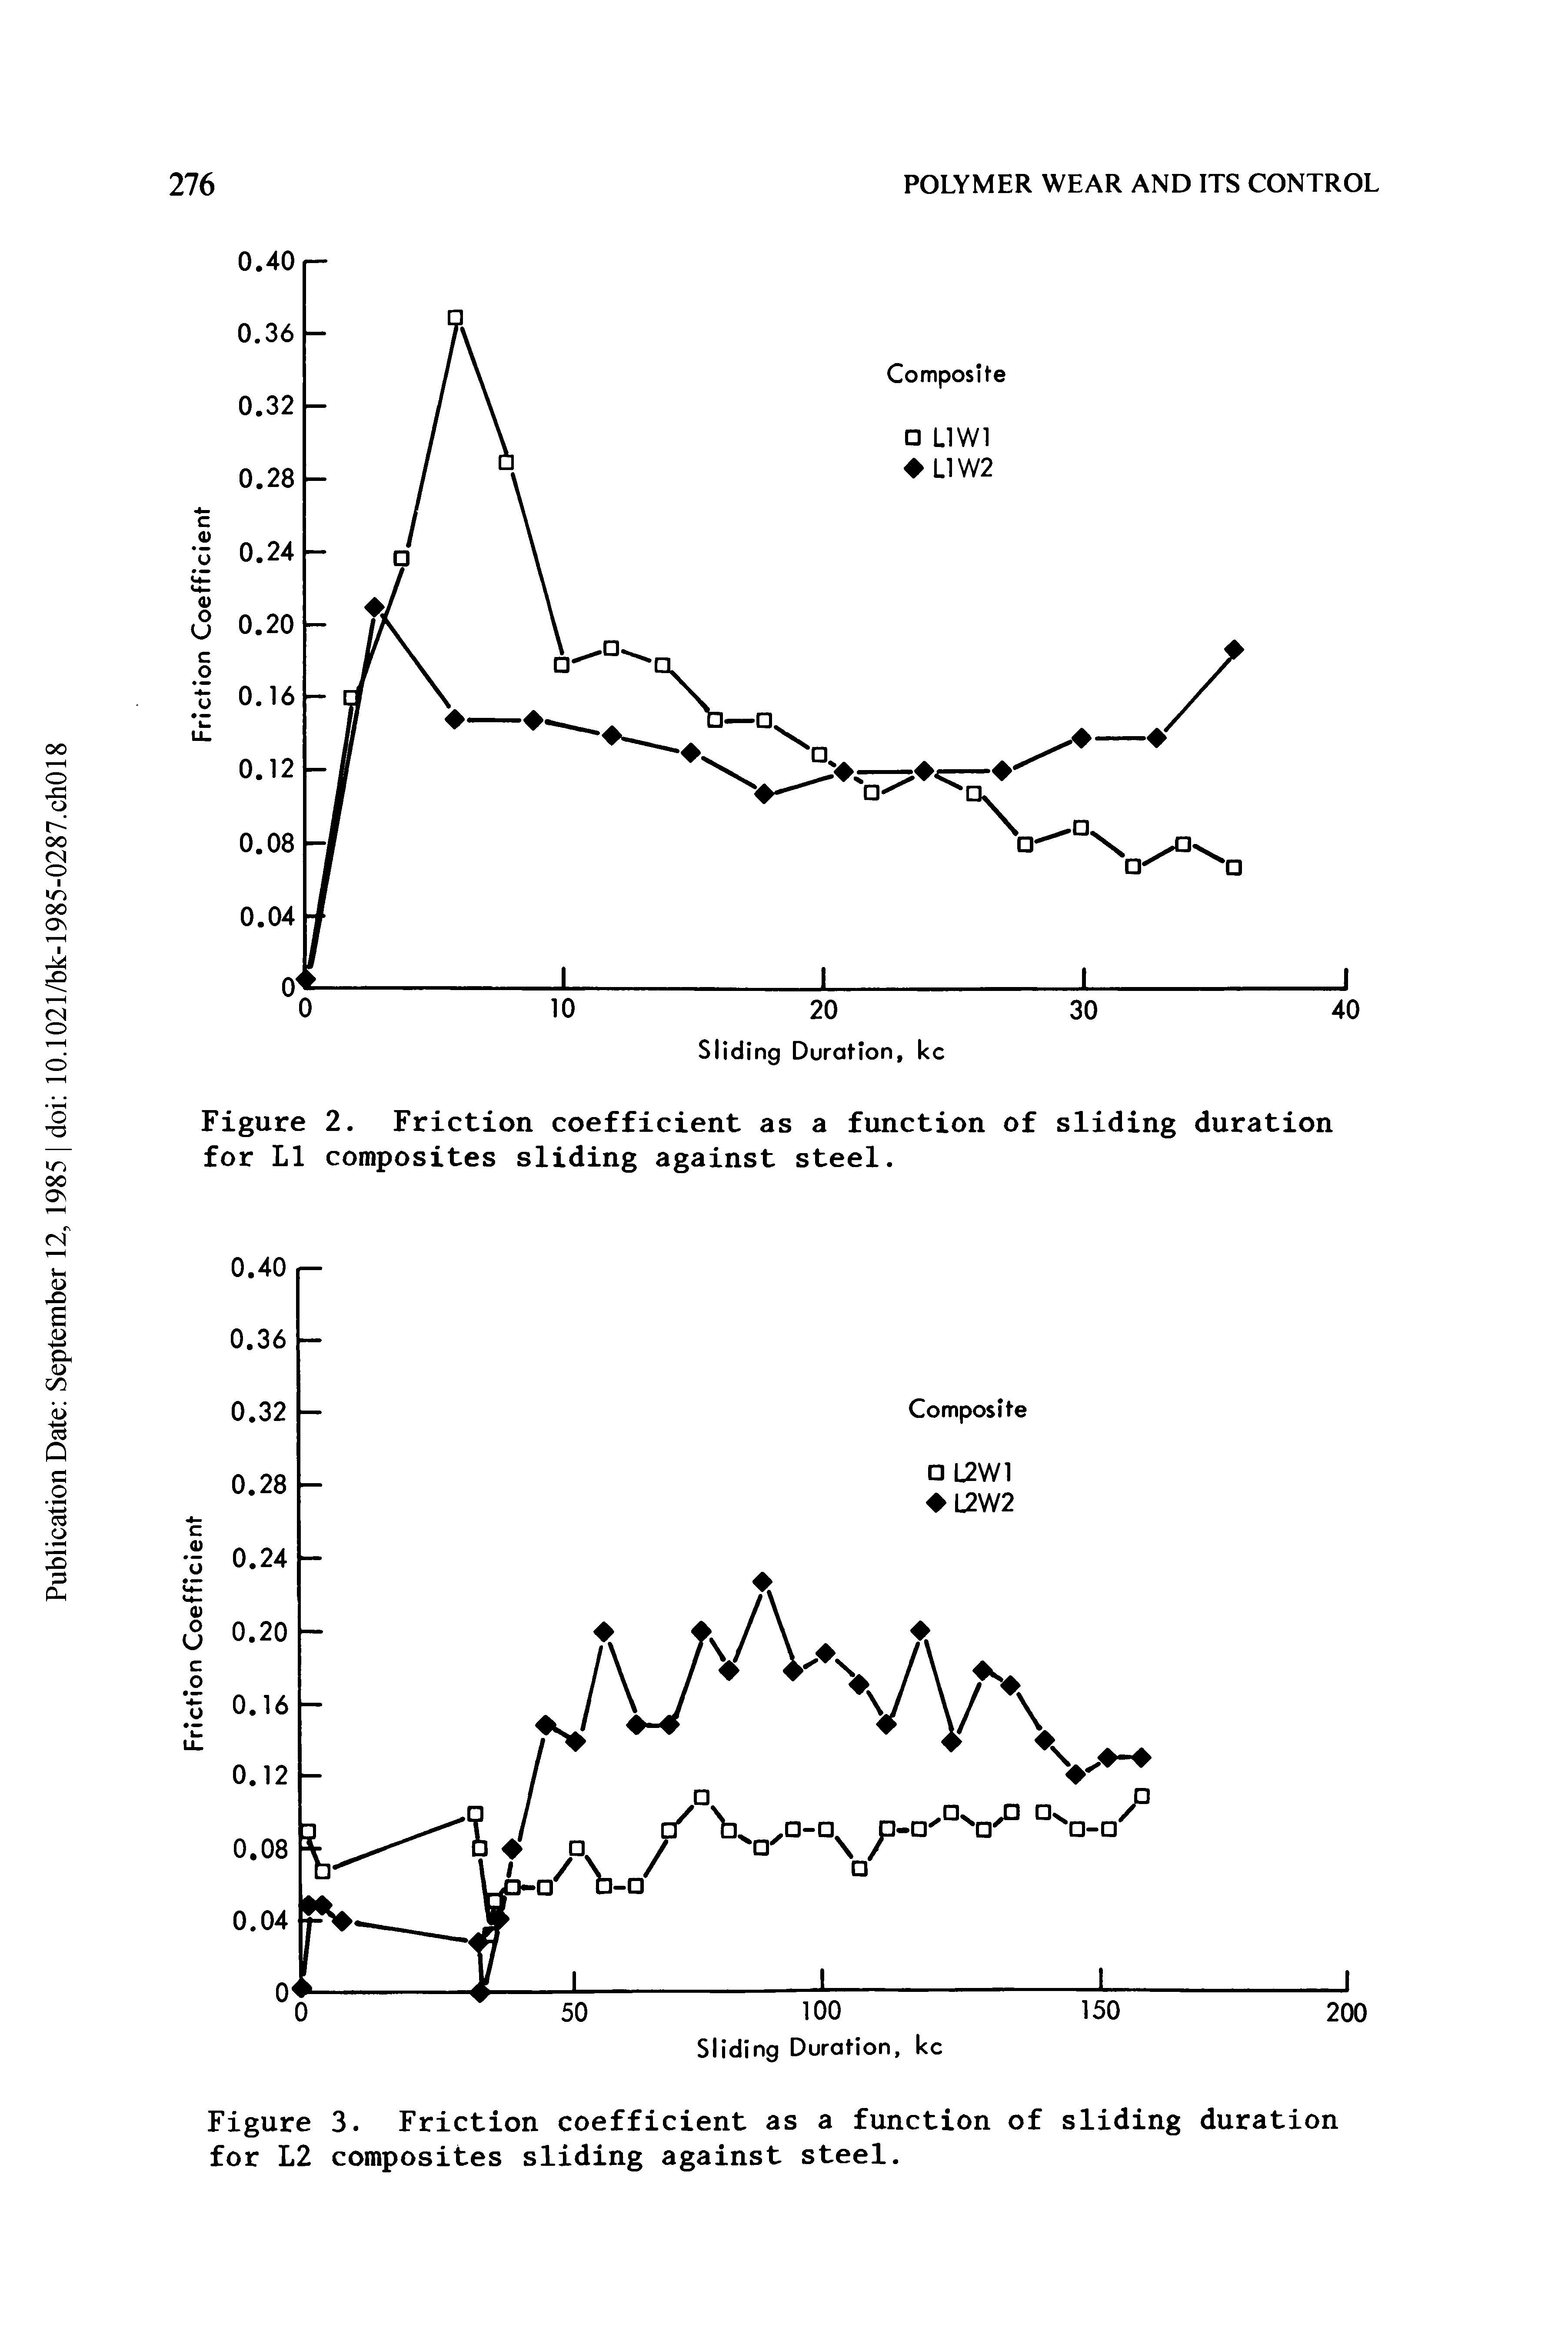 Figure 2. Friction coefficient as a function of sliding duration for LI composites sliding against steel.